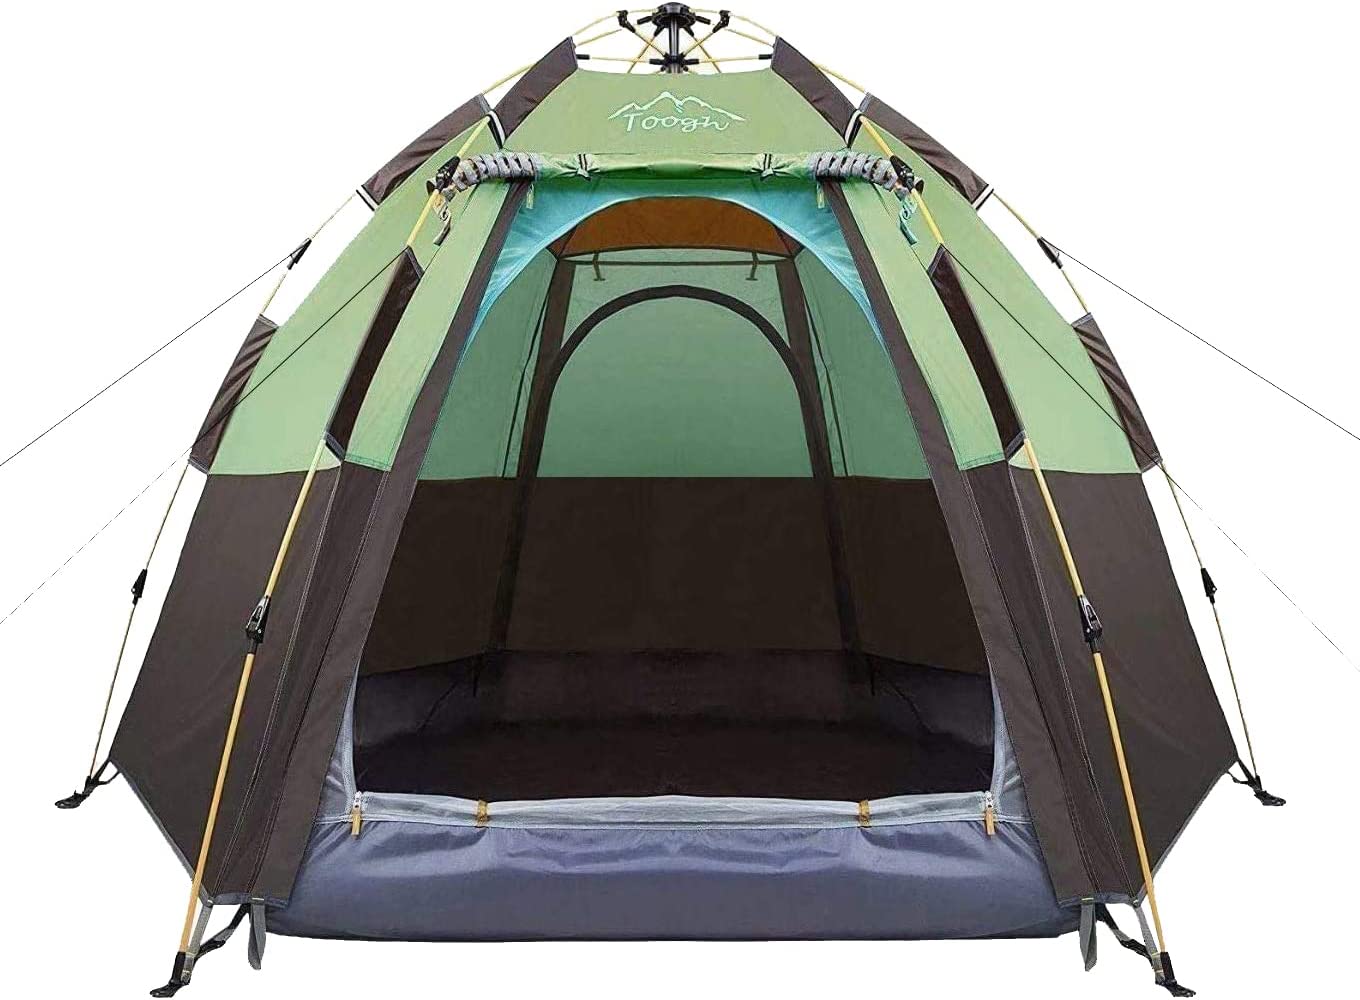  9. Toogh 4 Person Camping Tent 